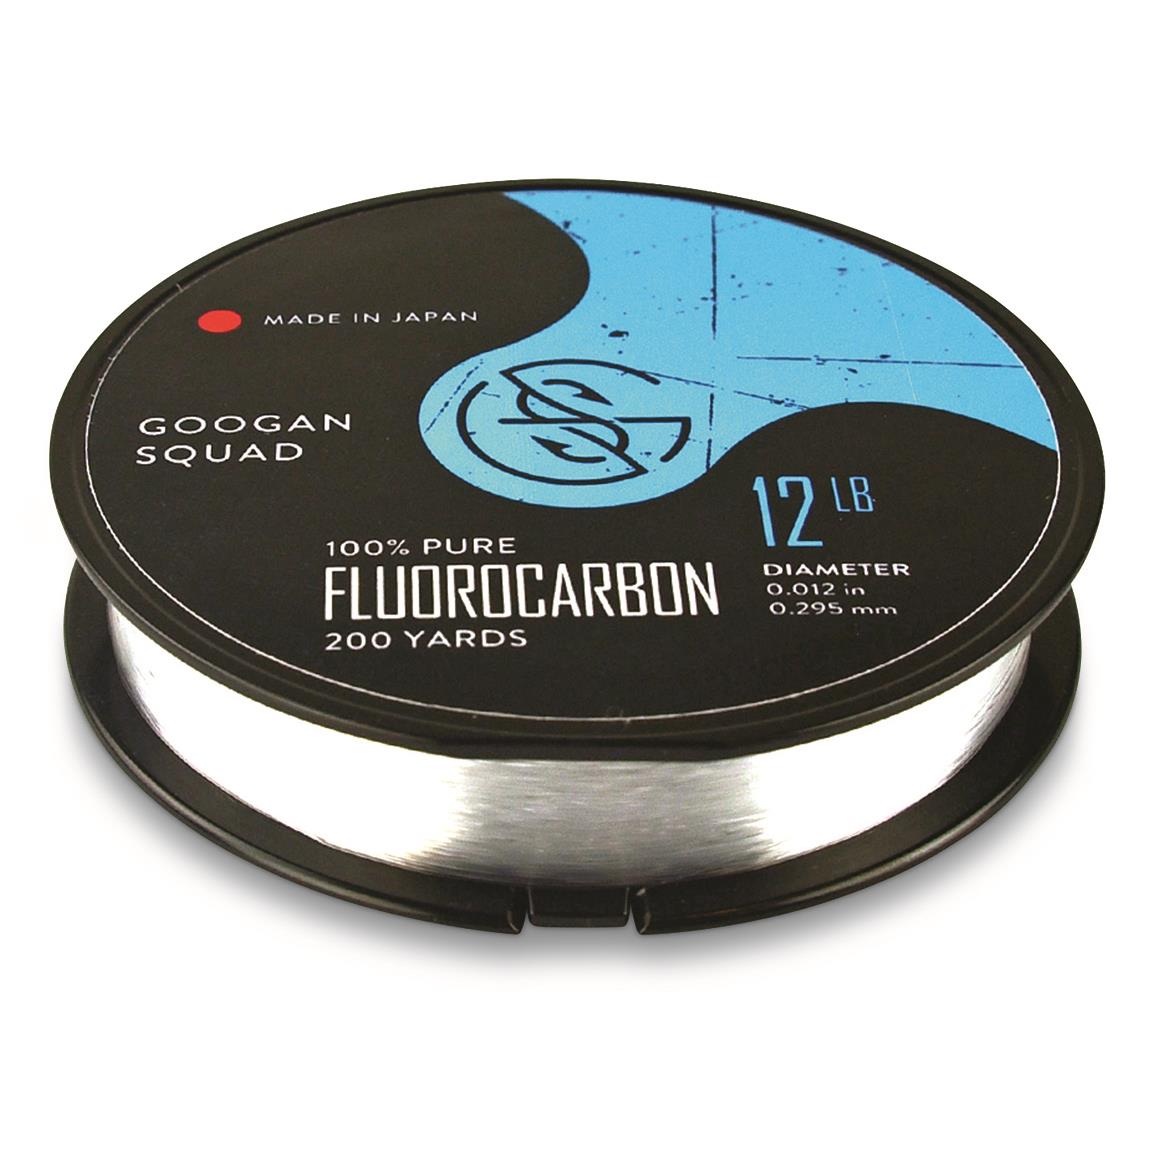 Googan Squad Fluorocarbon Fishing Line, 200 yards, Clear